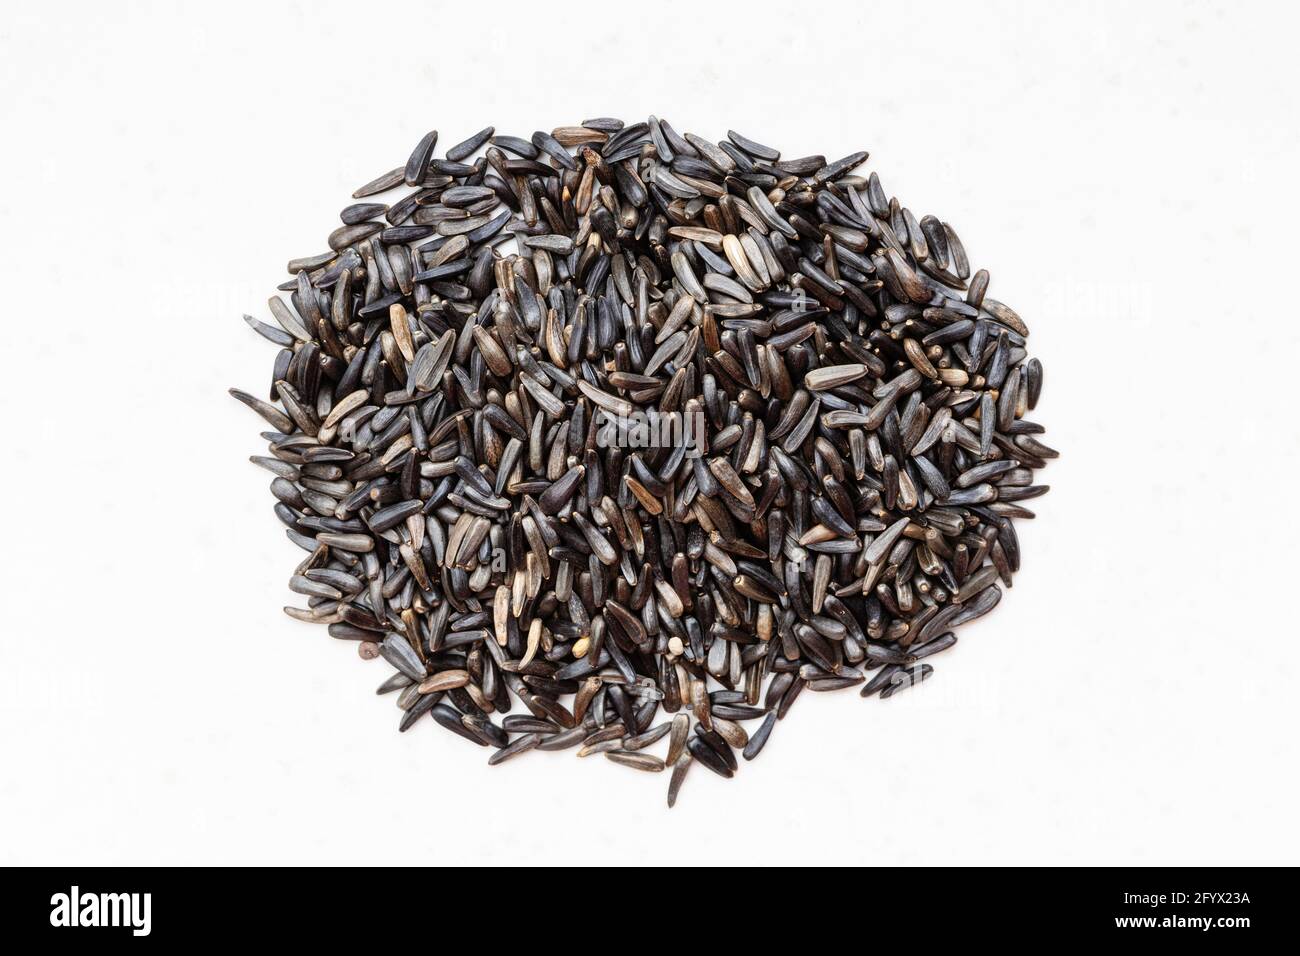 top view of pile of whole-grain niger seeds (Guizotia Abyssinica) close up on gray ceramic plate Stock Photo